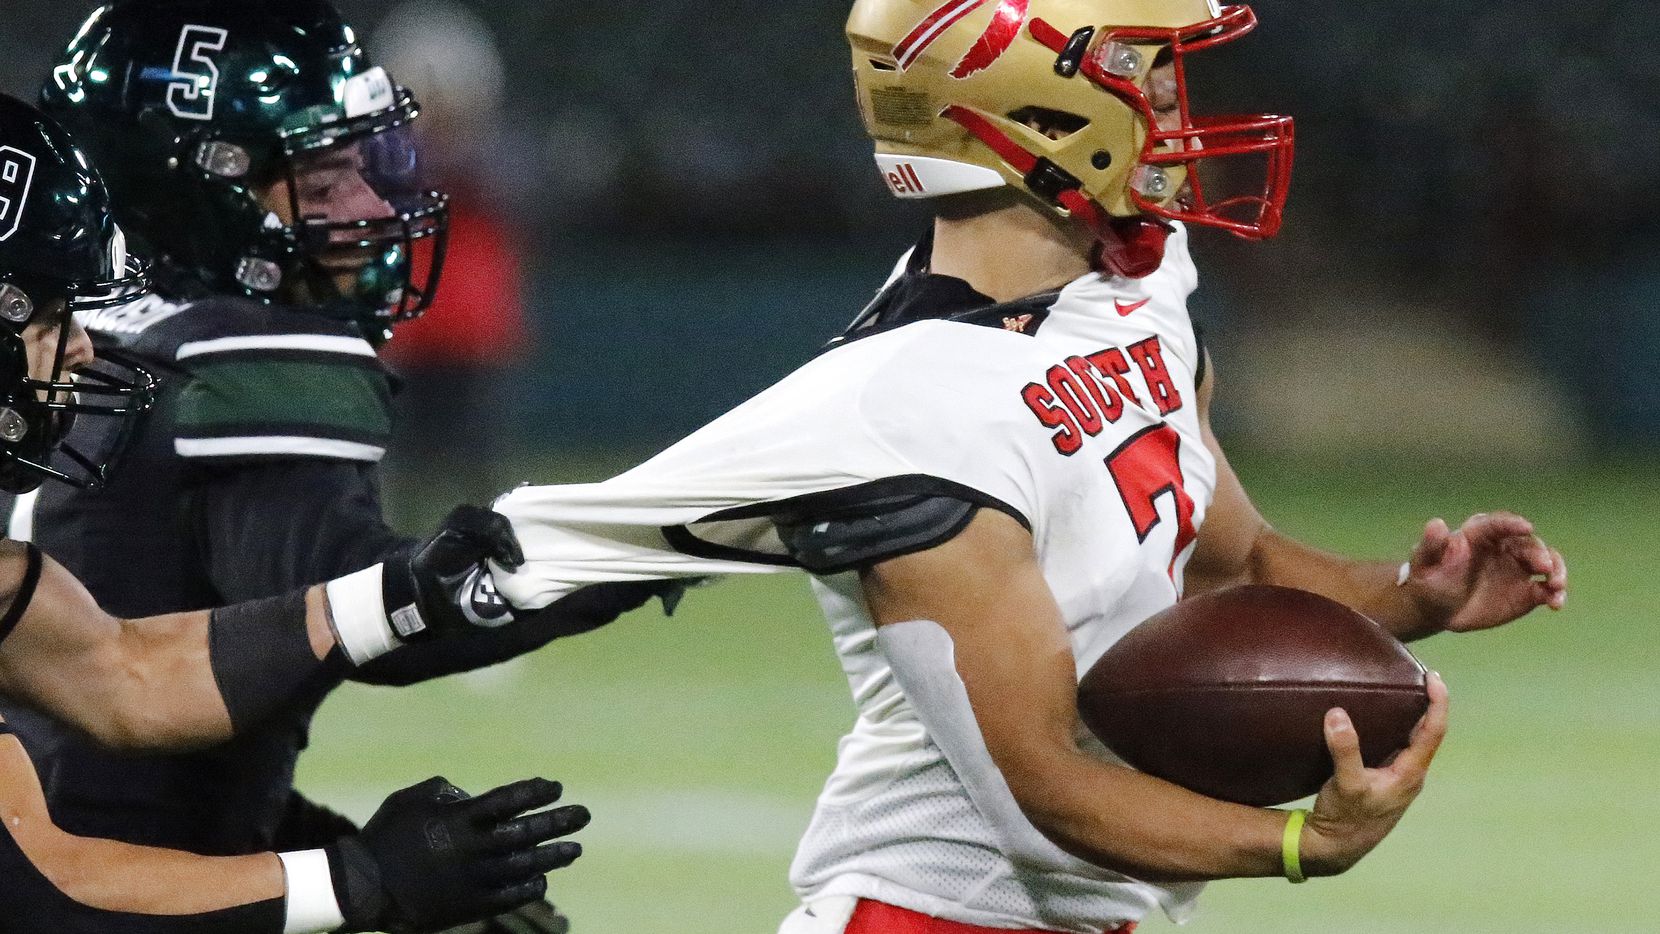 South Grand Prairie High School quarterback Jaden Stanley (7) has his jersey stretched by...